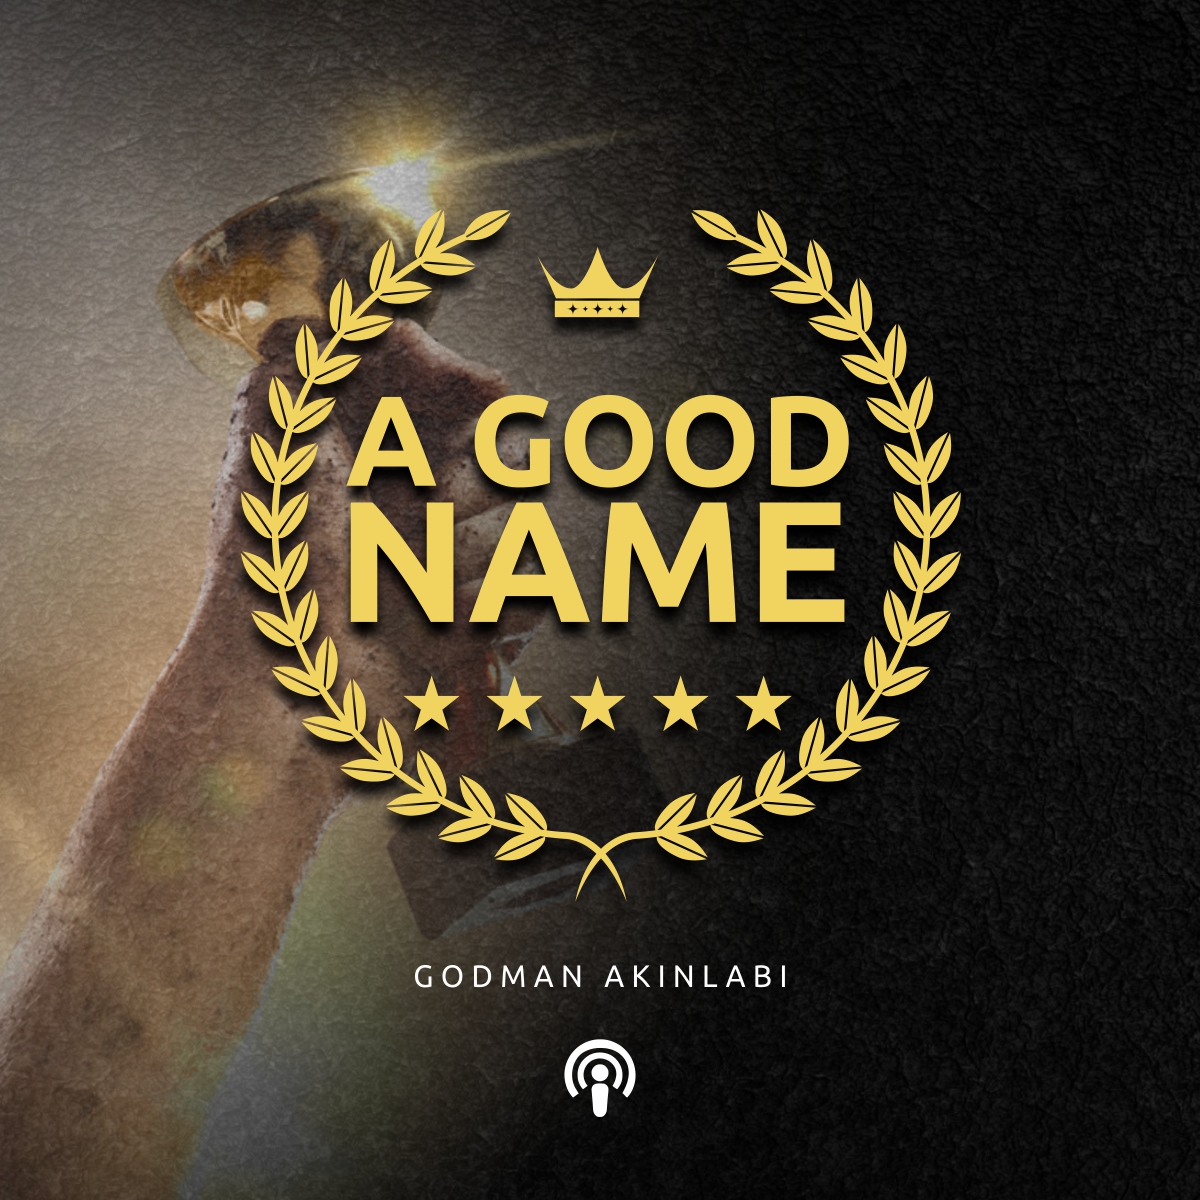 A Good Name (The Value of Integrity) by Godman Akinlabi